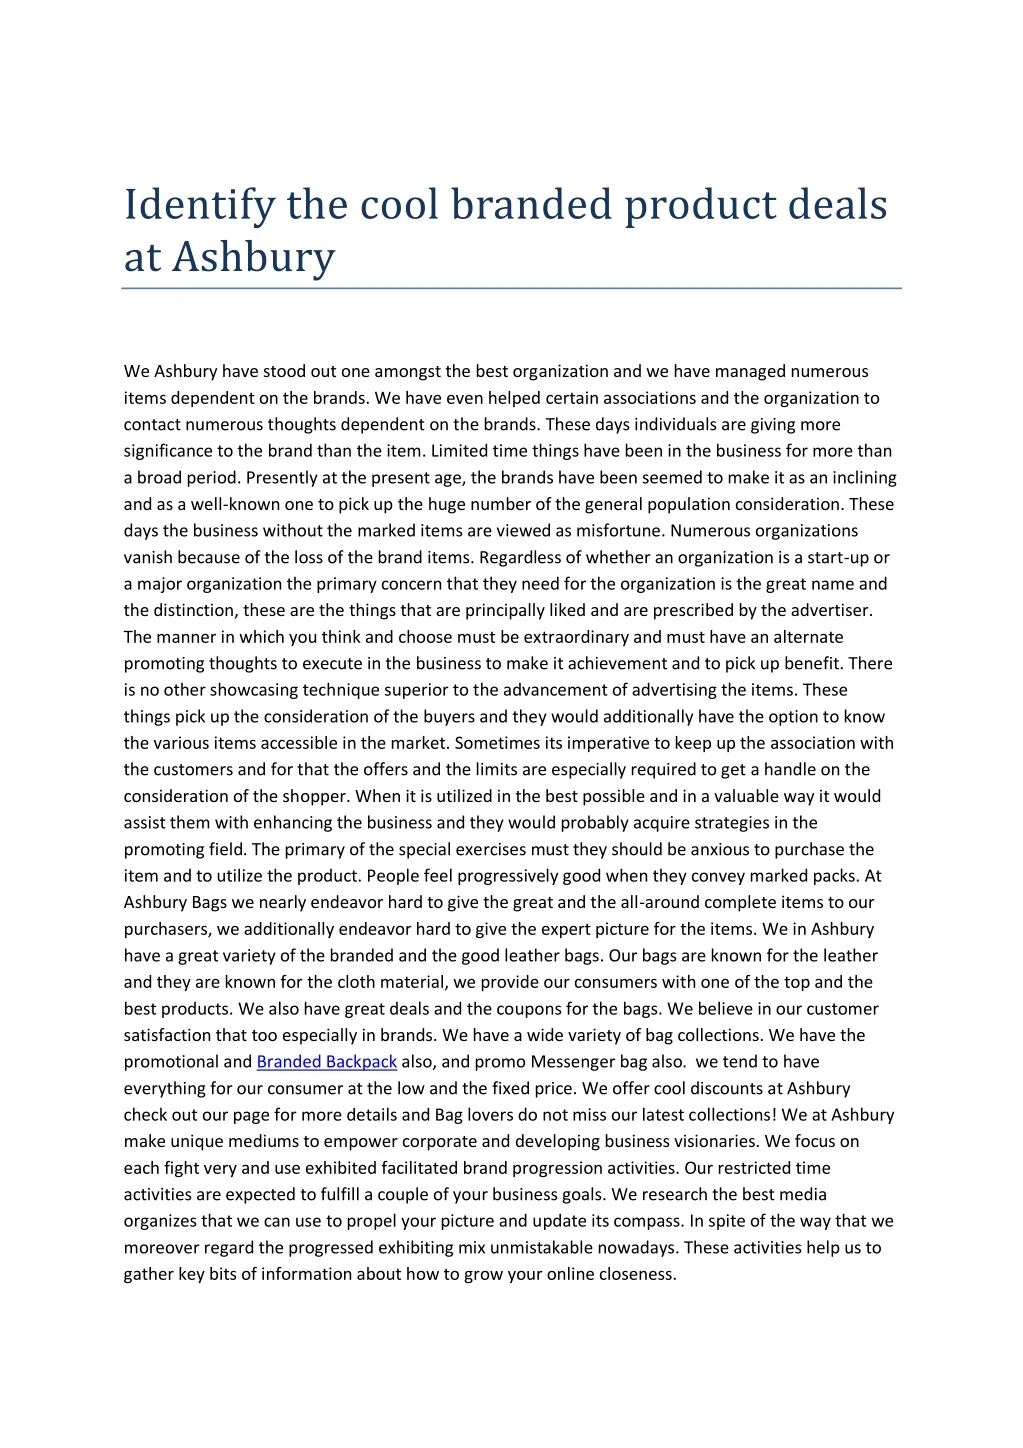 identify the cool branded product deals at ashbury